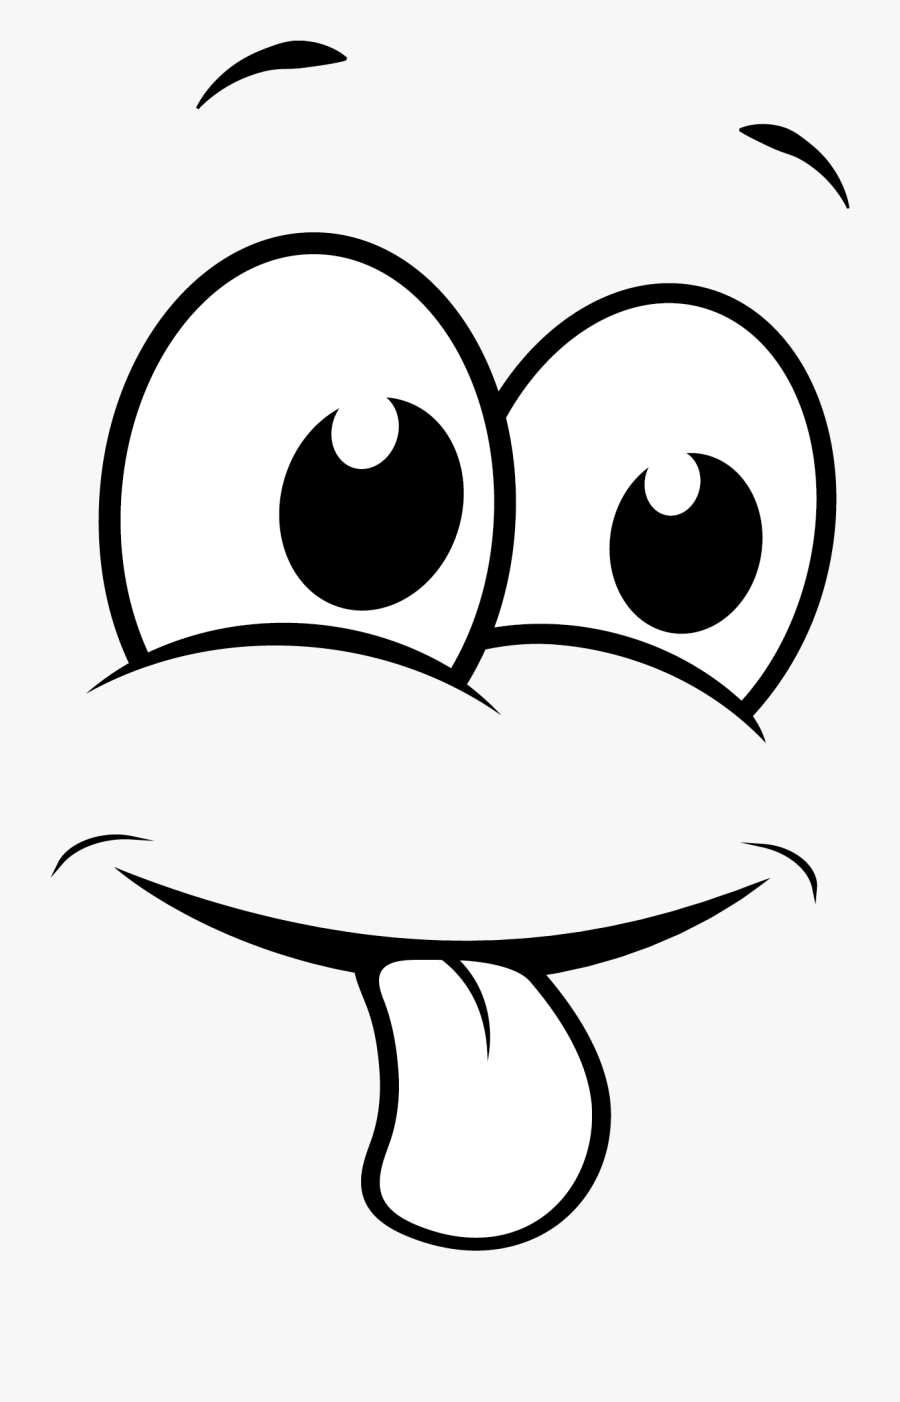 Peek A Boo - Cartoon Eyes And Mouth Png, Transparent Clipart